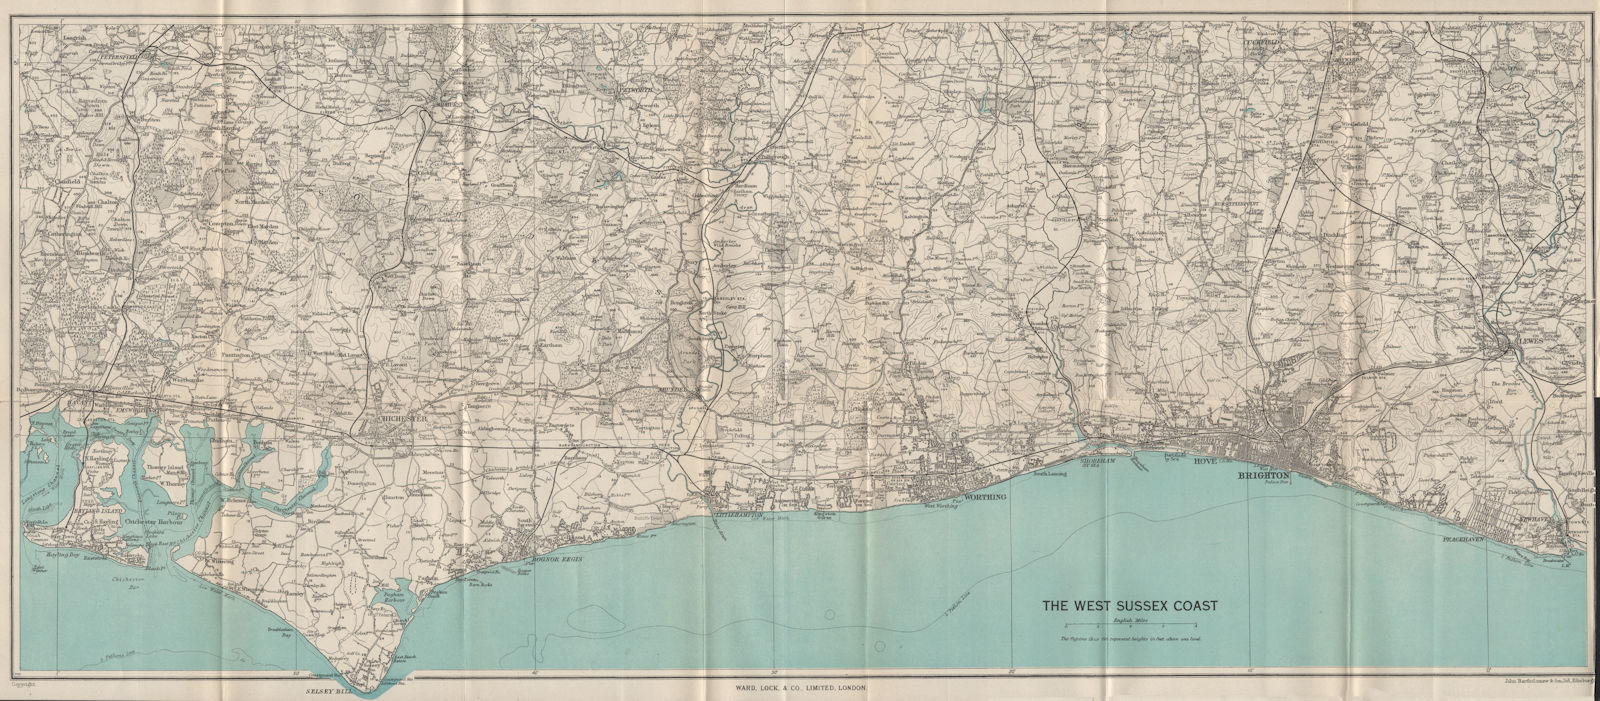 Associate Product WEST SUSSEX COAST South Downs Brighton Worthing Bognor Regis Chichester 1950 map